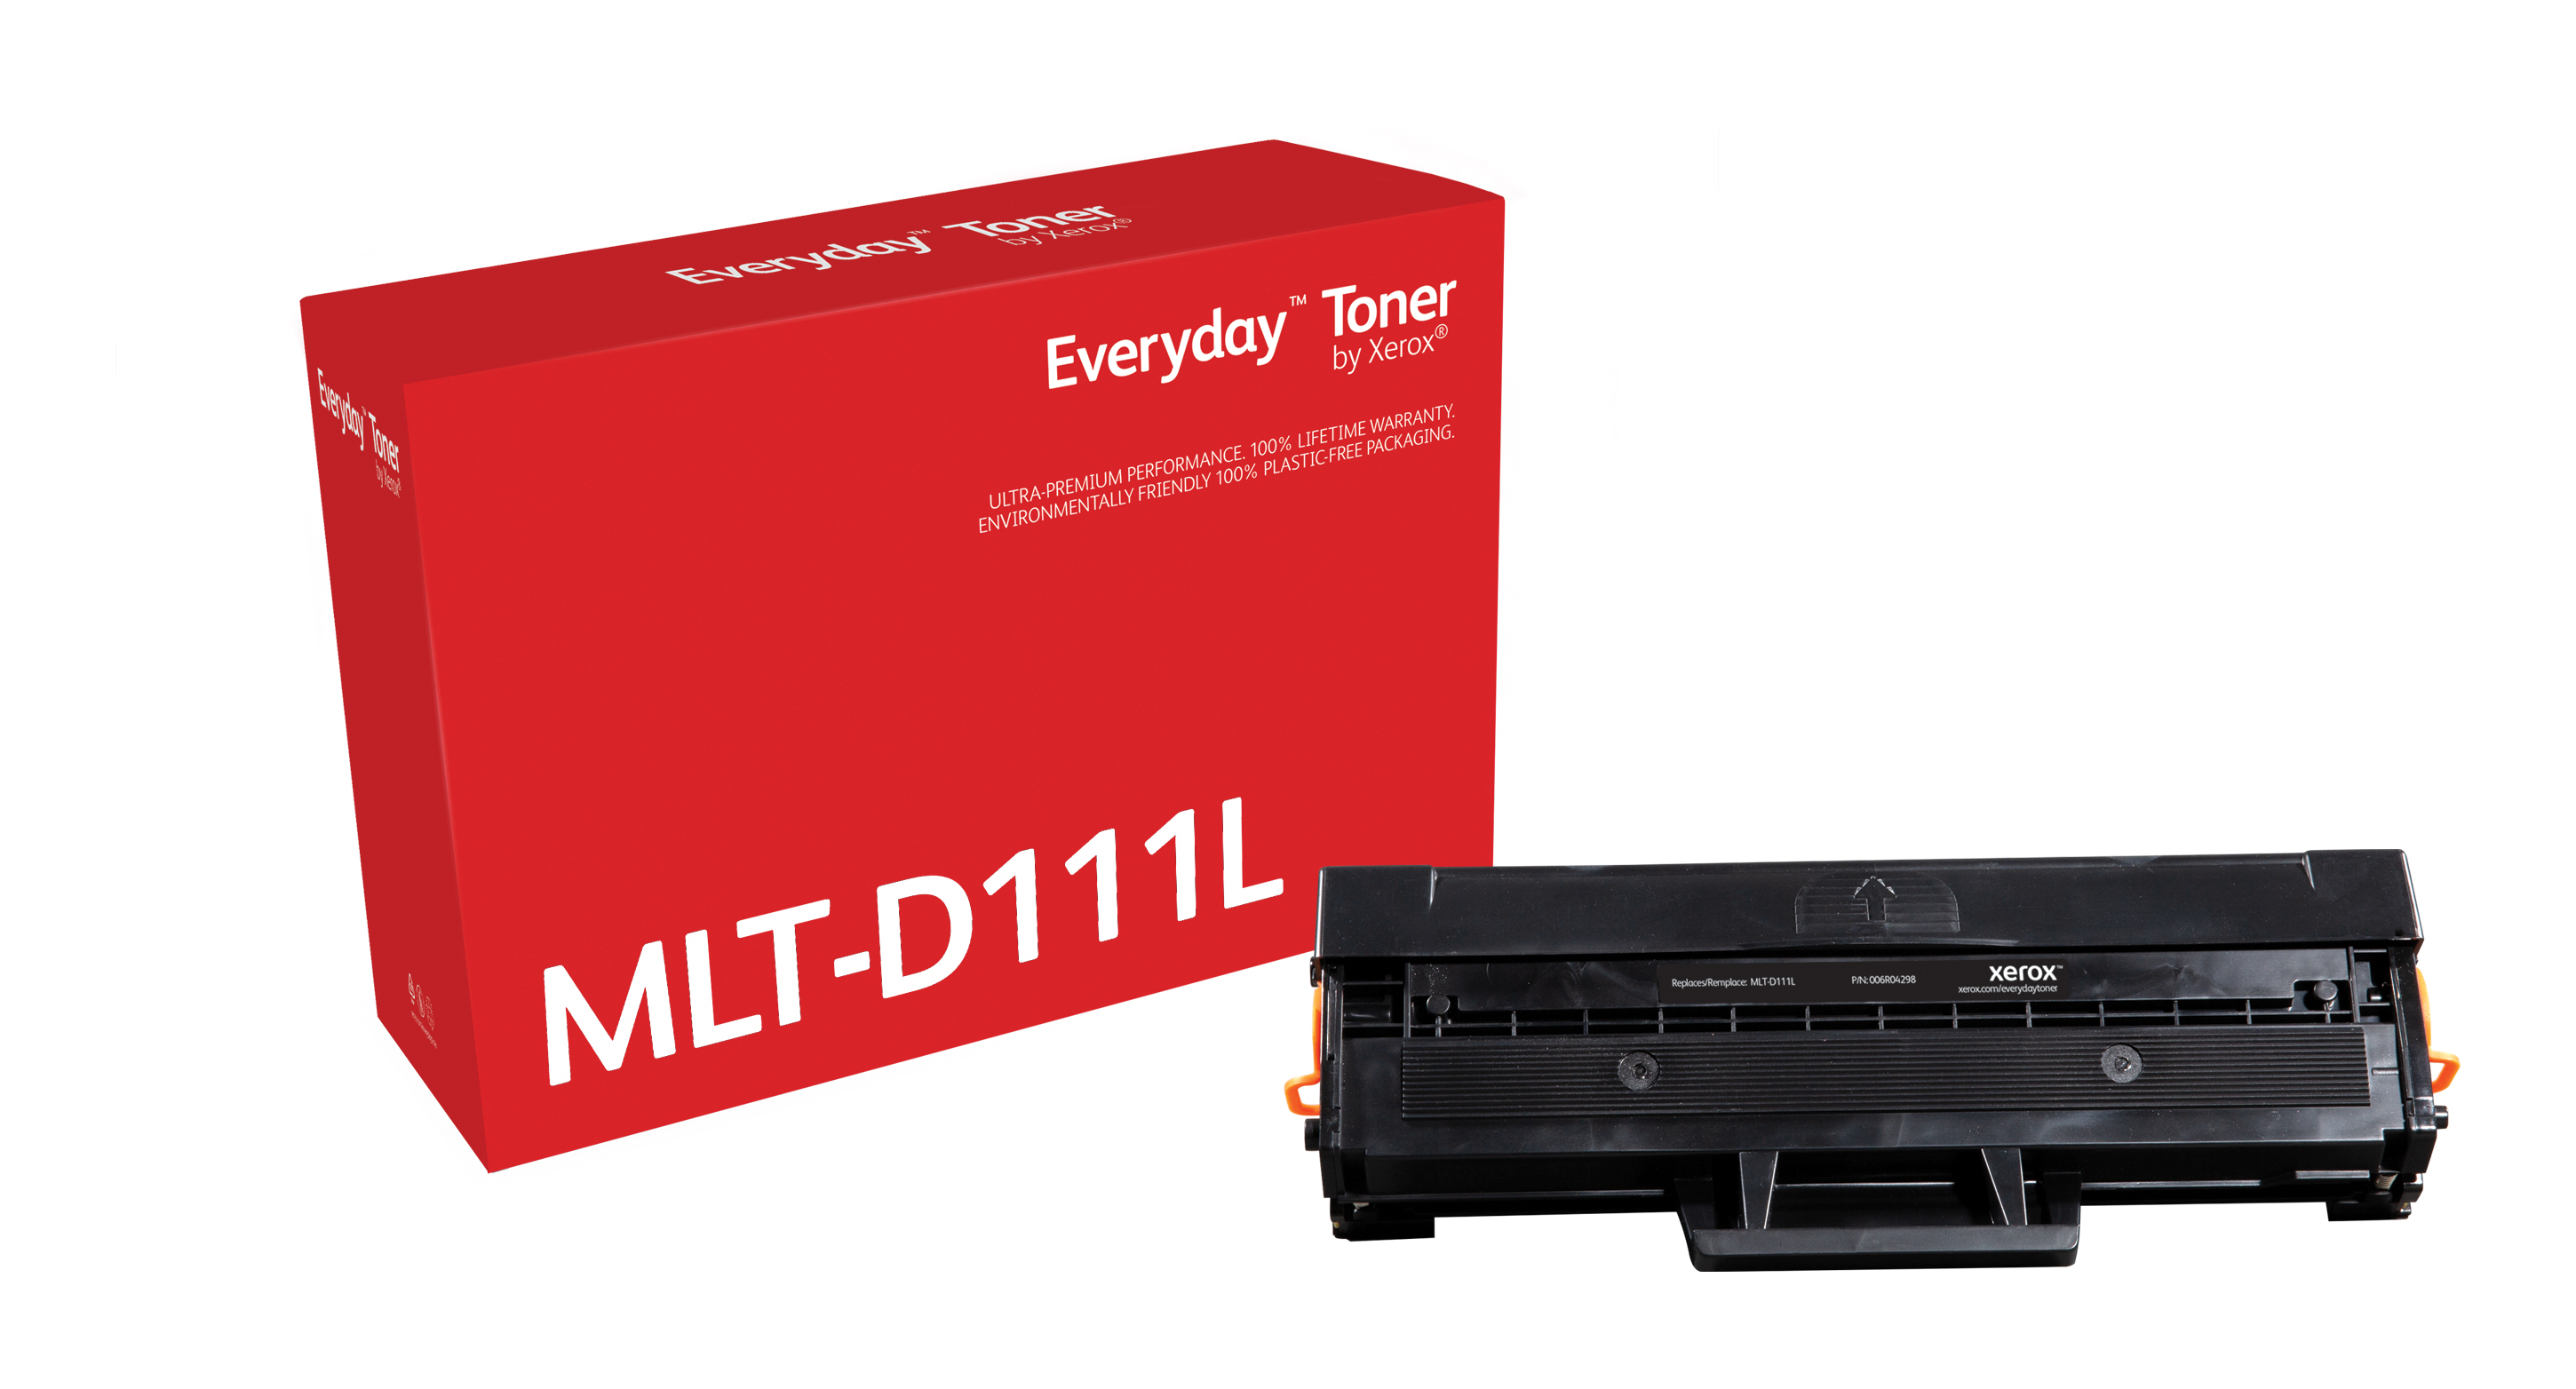 Everyday Black Toner compatible with Samsung MLT-D111L, High Yield  006R04298 by Xerox